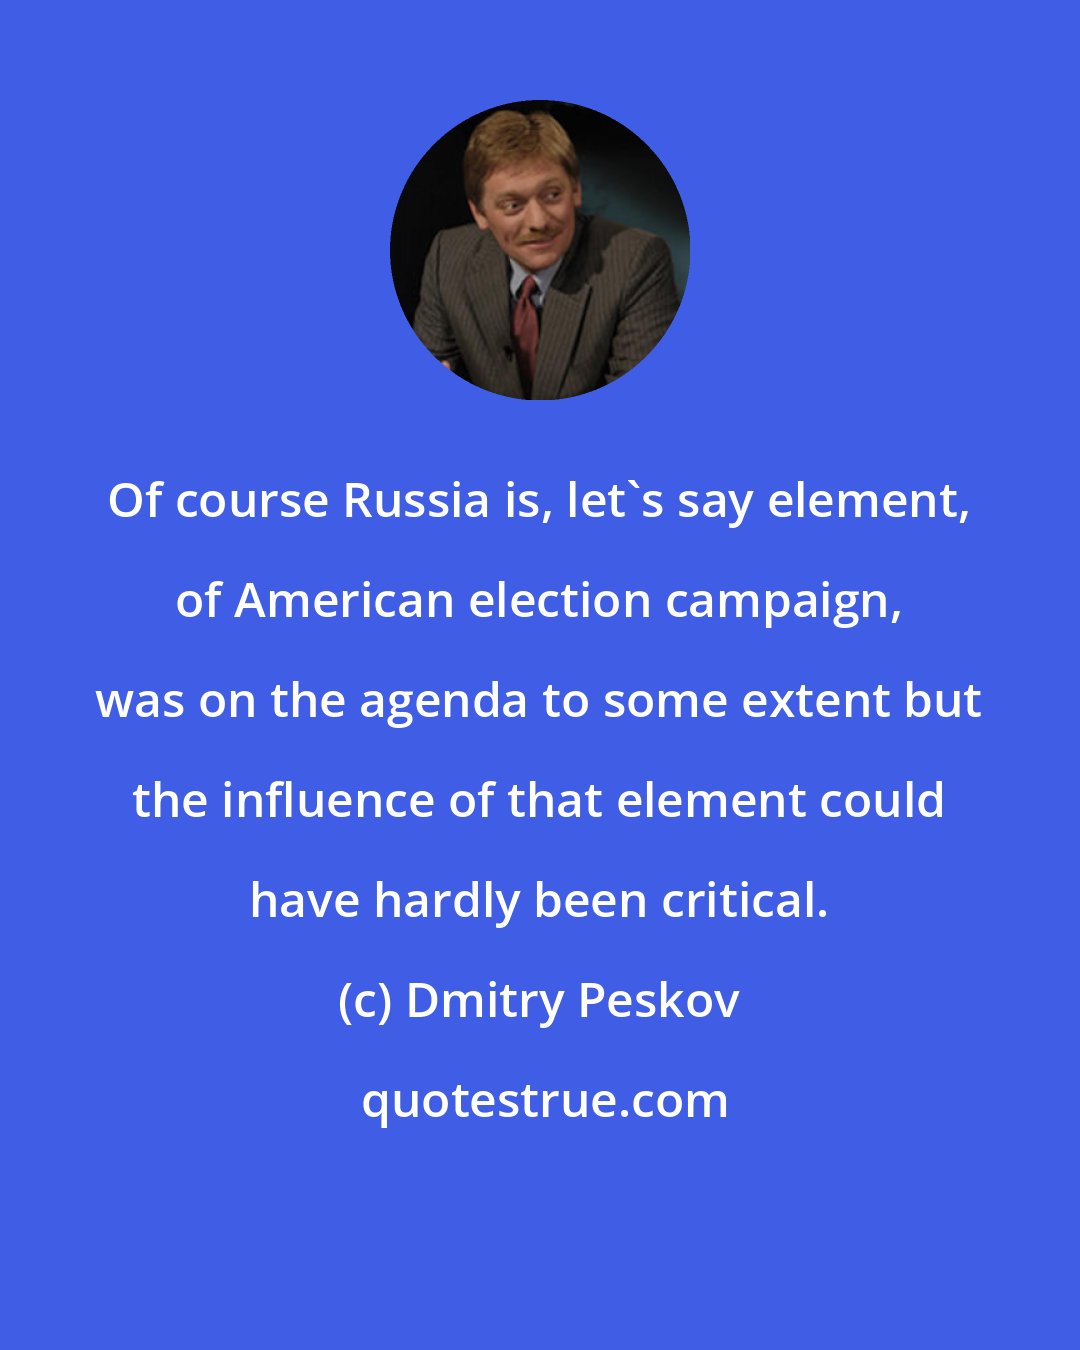 Dmitry Peskov: Of course Russia is, let's say element, of American election campaign, was on the agenda to some extent but the influence of that element could have hardly been critical.